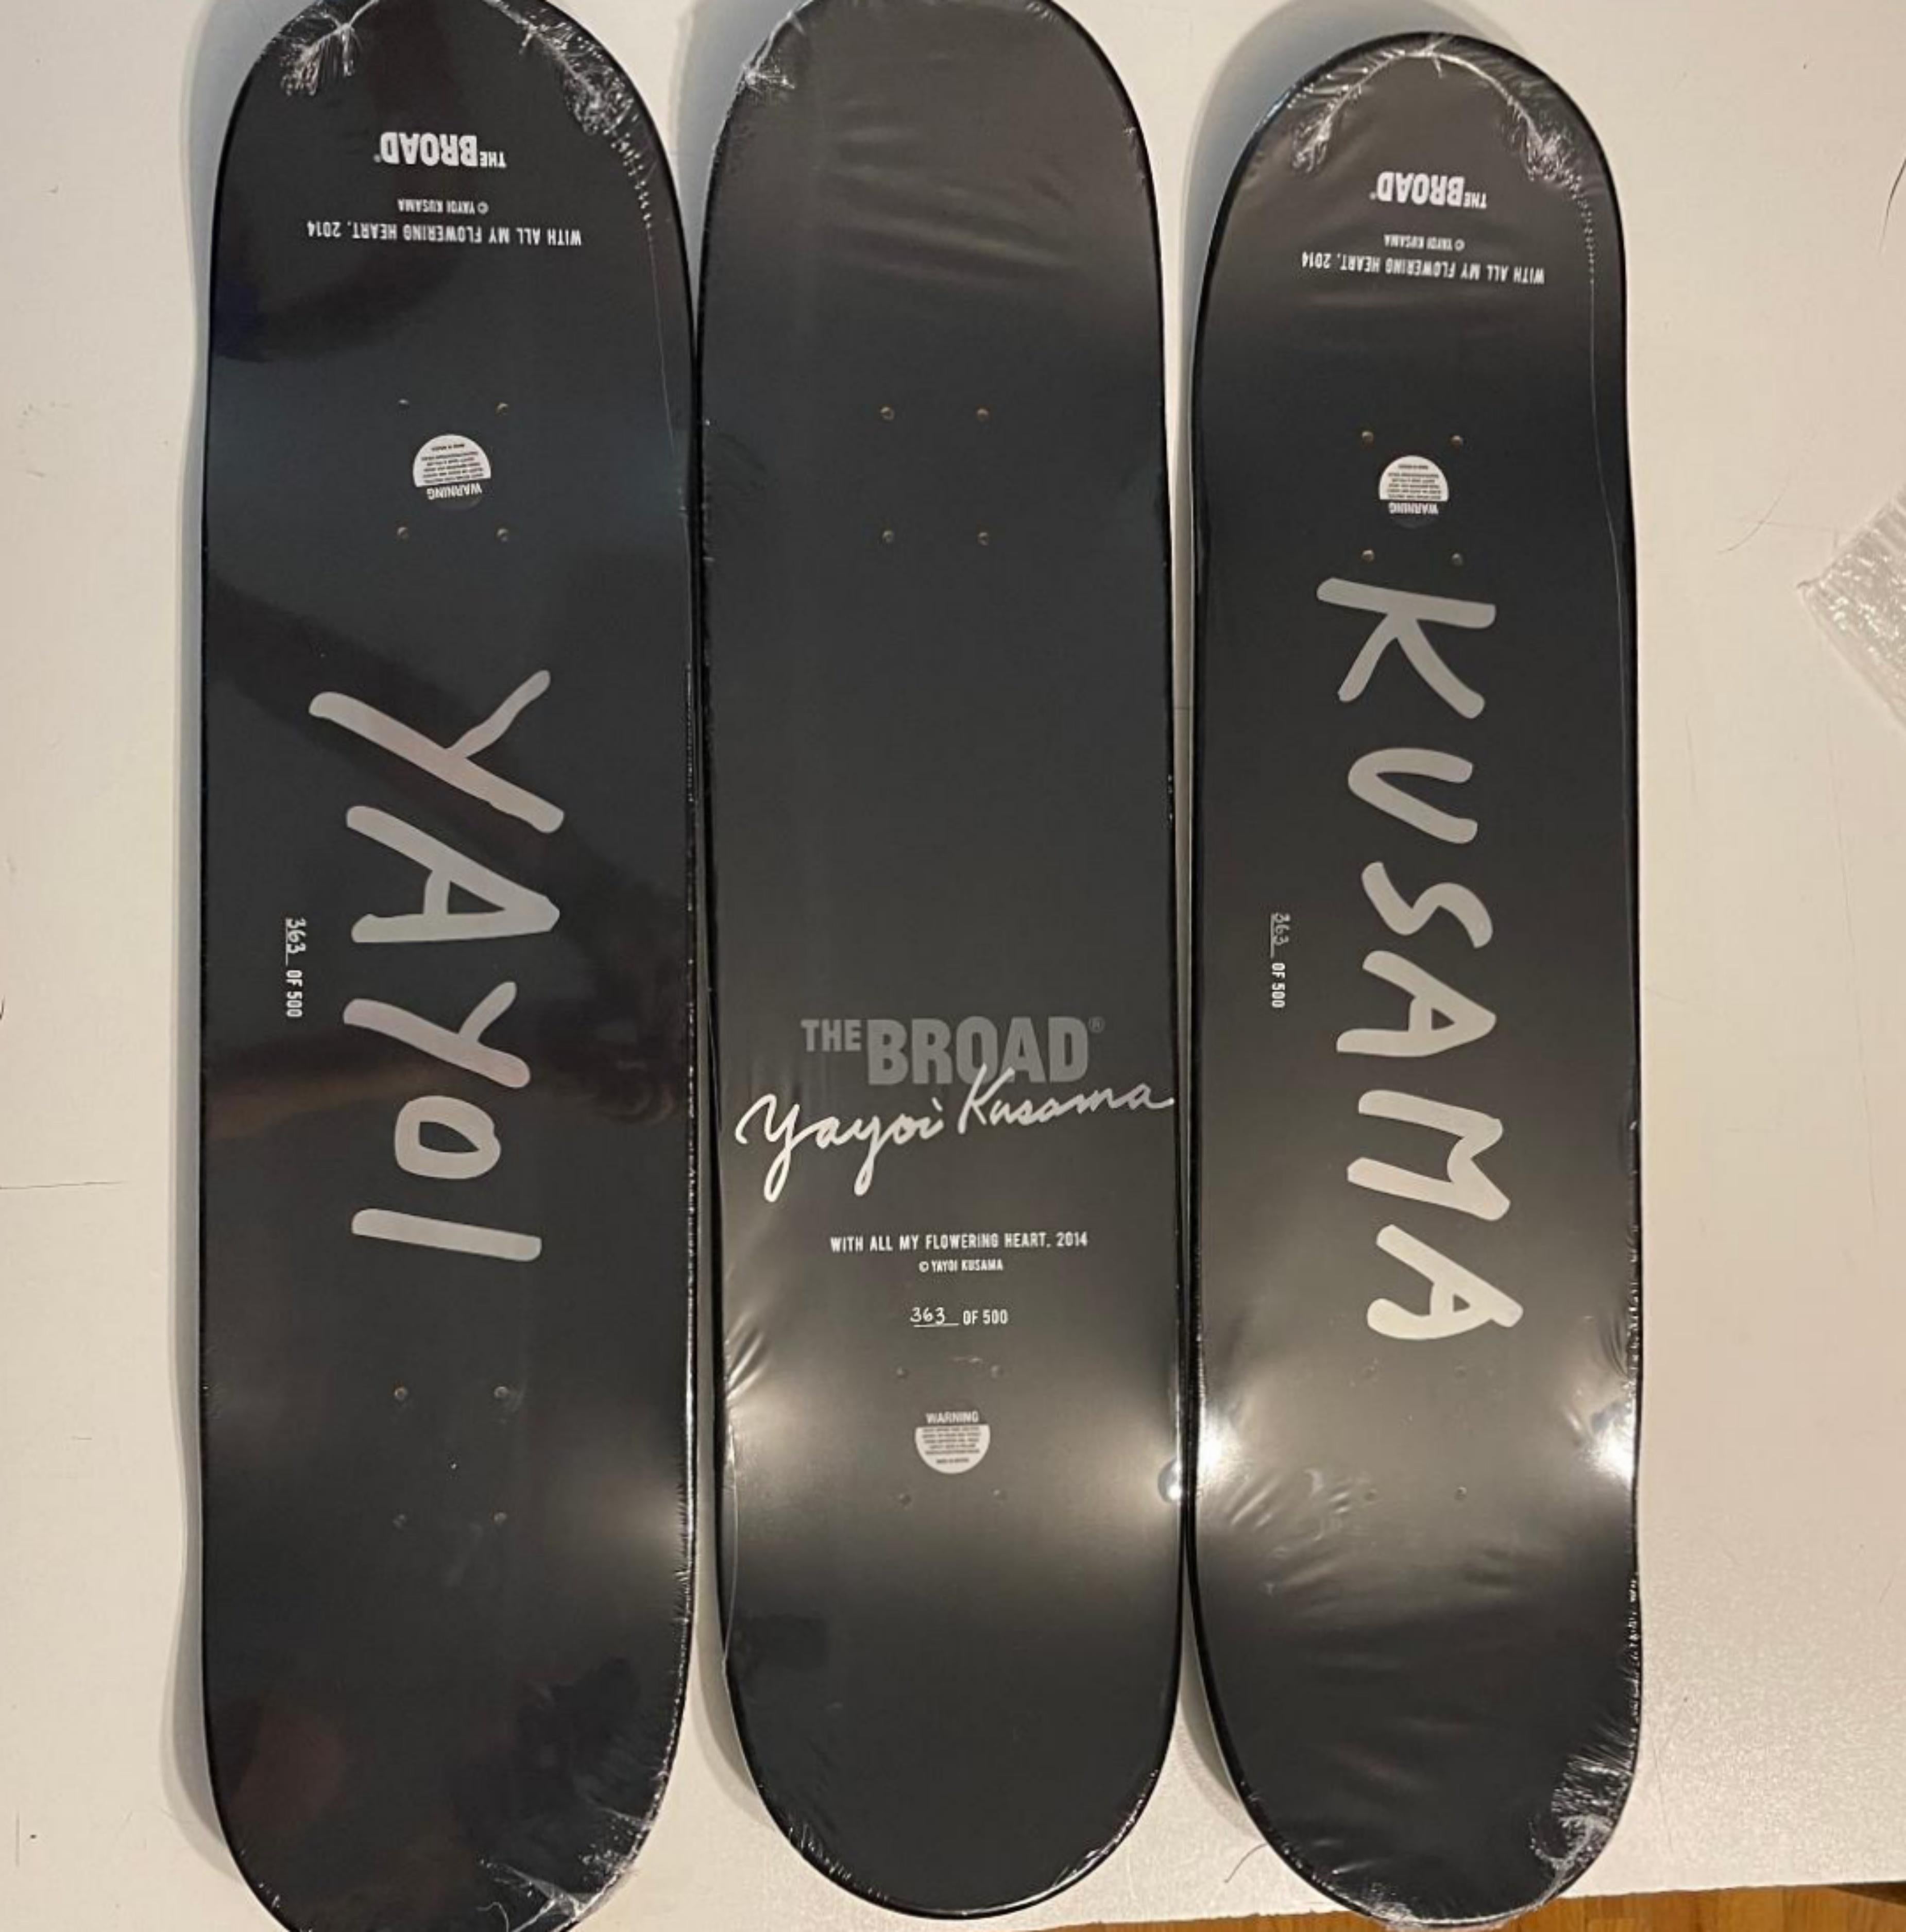 Yayoi Kusama
With All My Flowering Heart (Triptych), 2014
Set of Three (3) Separate Limited Edition numbered skate decks on 7-ply Canadian maple wood
31 × 8 × 2/5 inches (each)
Authorized printed (plate) signature; individually numbered from the